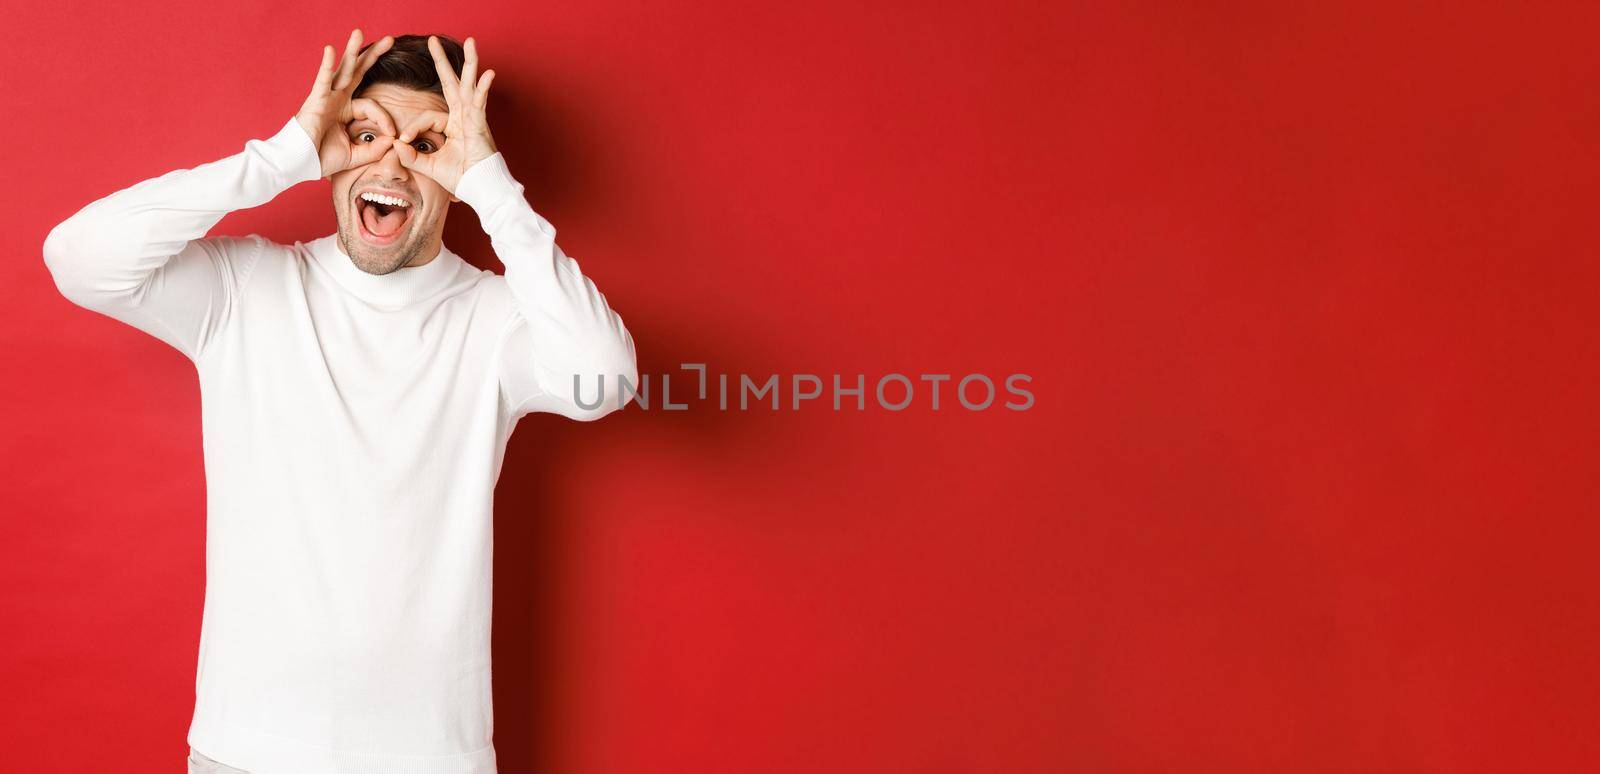 Portrait of handsome guy in white sweater, making funny mask with fingers, looking happy and smiling, standing over red background.